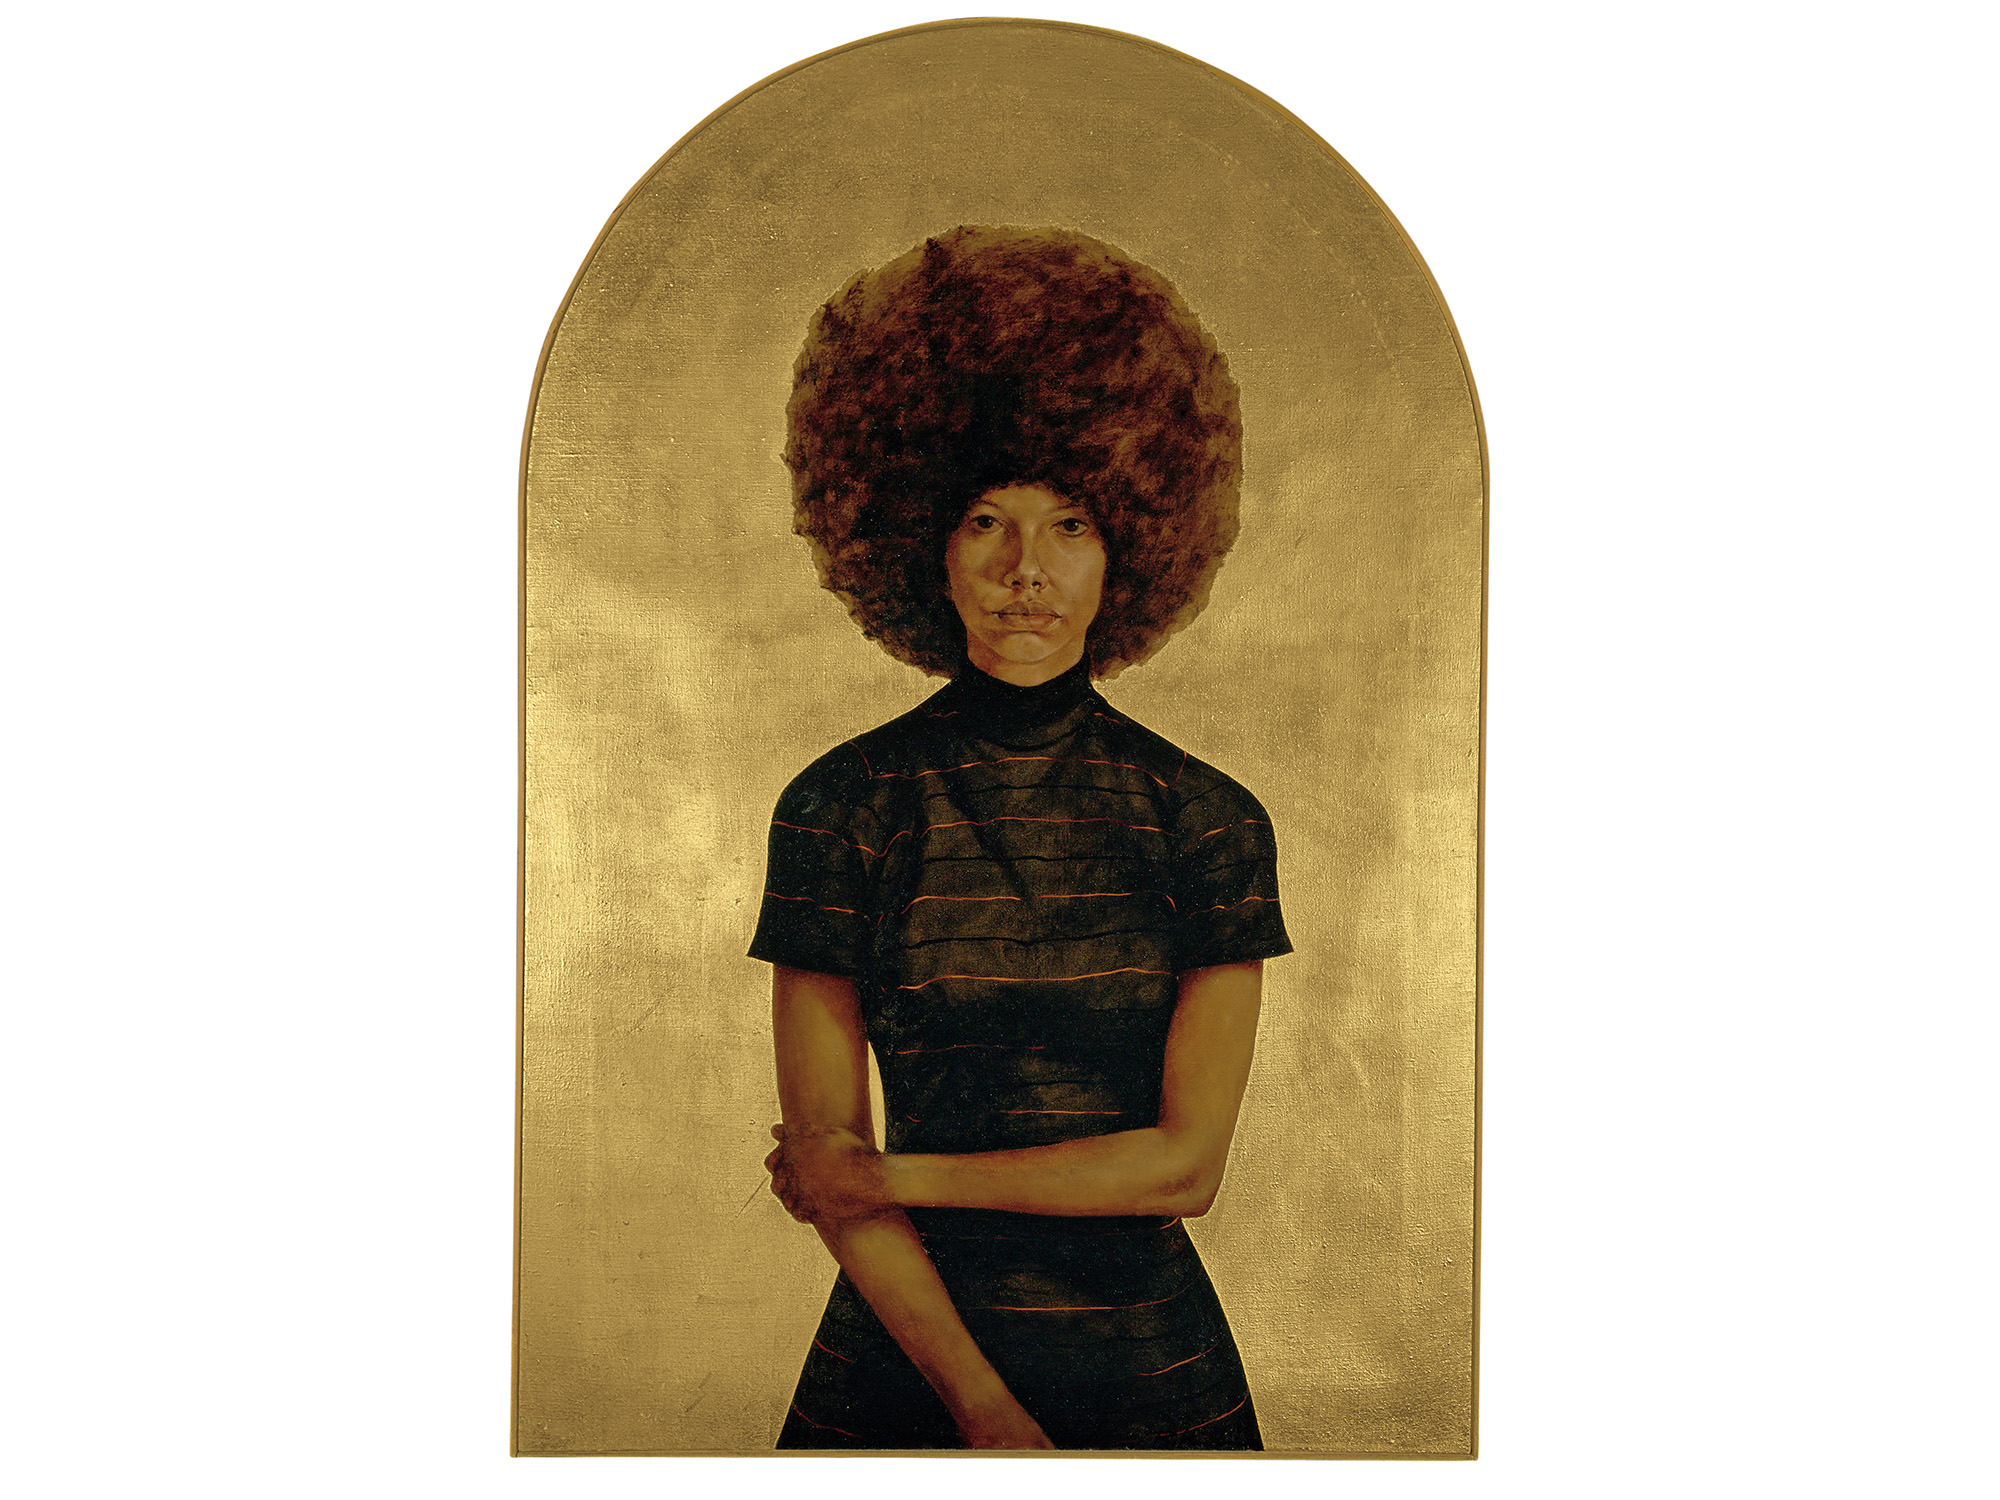 A painting of a woman in a short-sleeved black dress with orange stripes is facing forward looking at the viewer against a blank background covered in gold leaf. She is shown from the hips up and has one arm bent holding the opposite elbow. Her hair is a natural afro that frames her face in a circle. The top of the canvas forms an arch that mirrors the circle of her hair. 